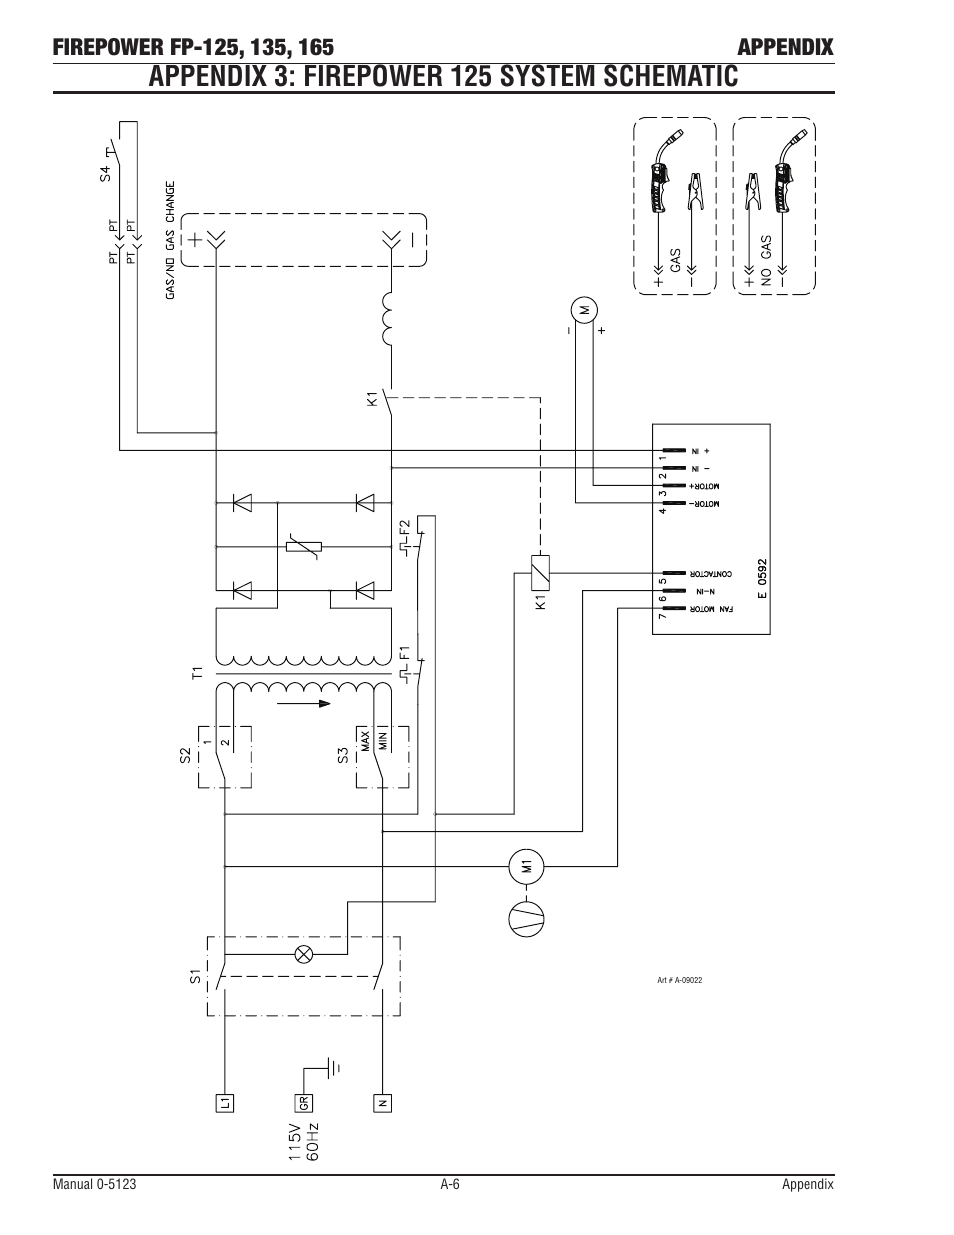 Appendix 3: firepower 125 system schematic | Tweco FP-165 Mini MIG User Manual | Page 54 / 60